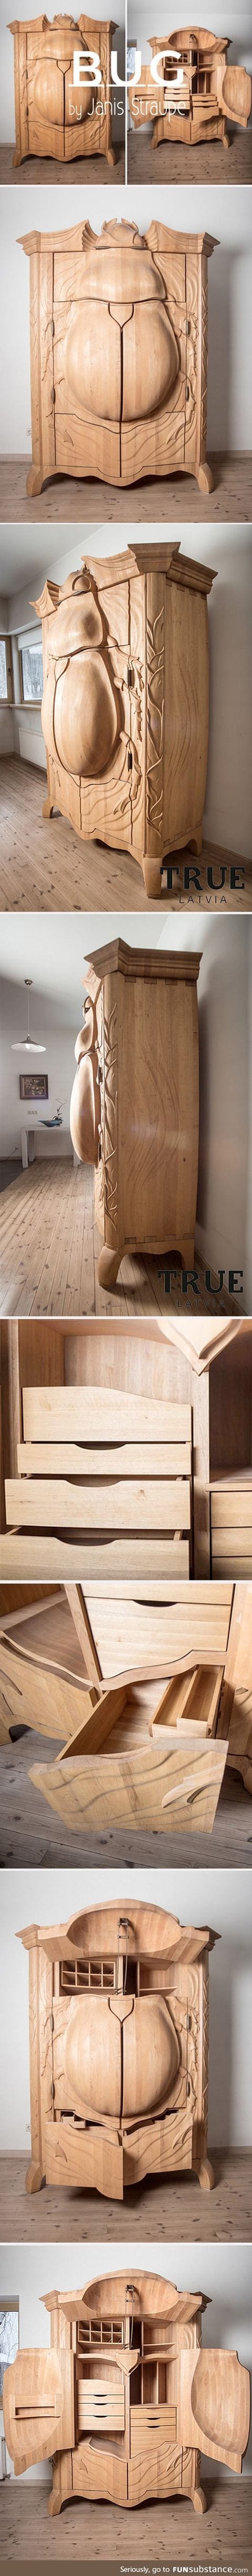 Beetle cabinet turns into an owl when you open it